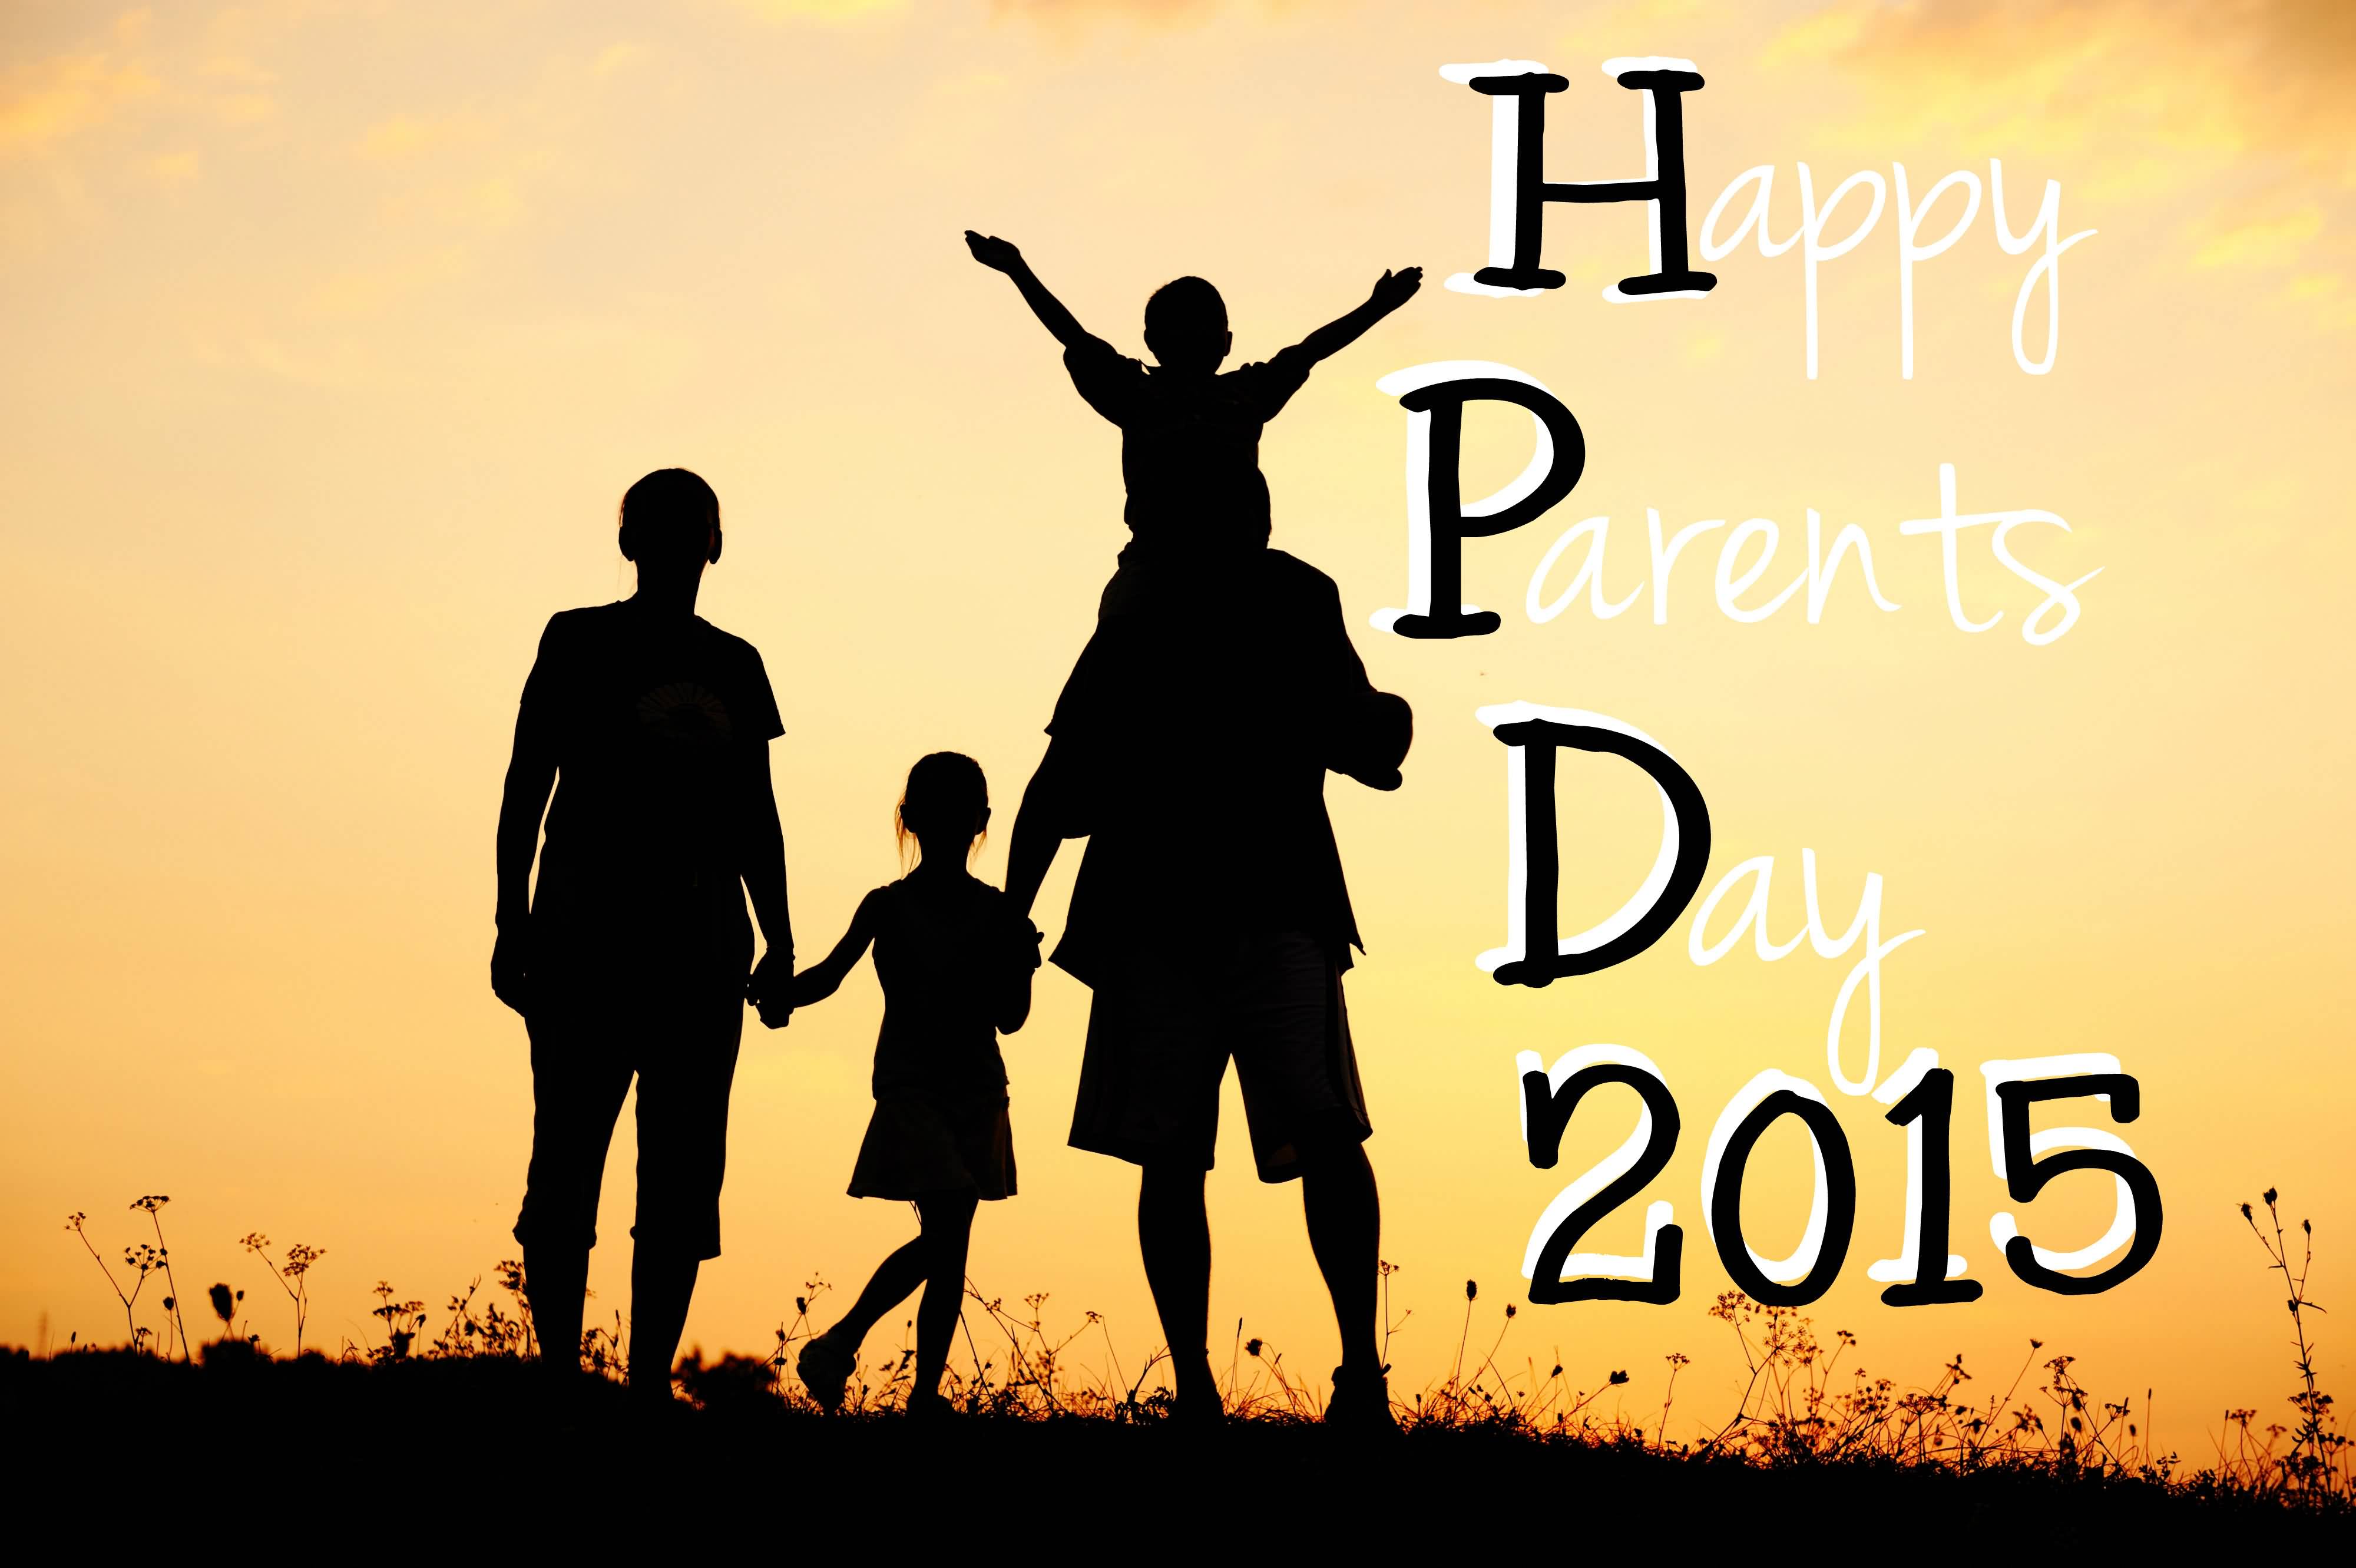 Happy Parents Day Wishes Picture